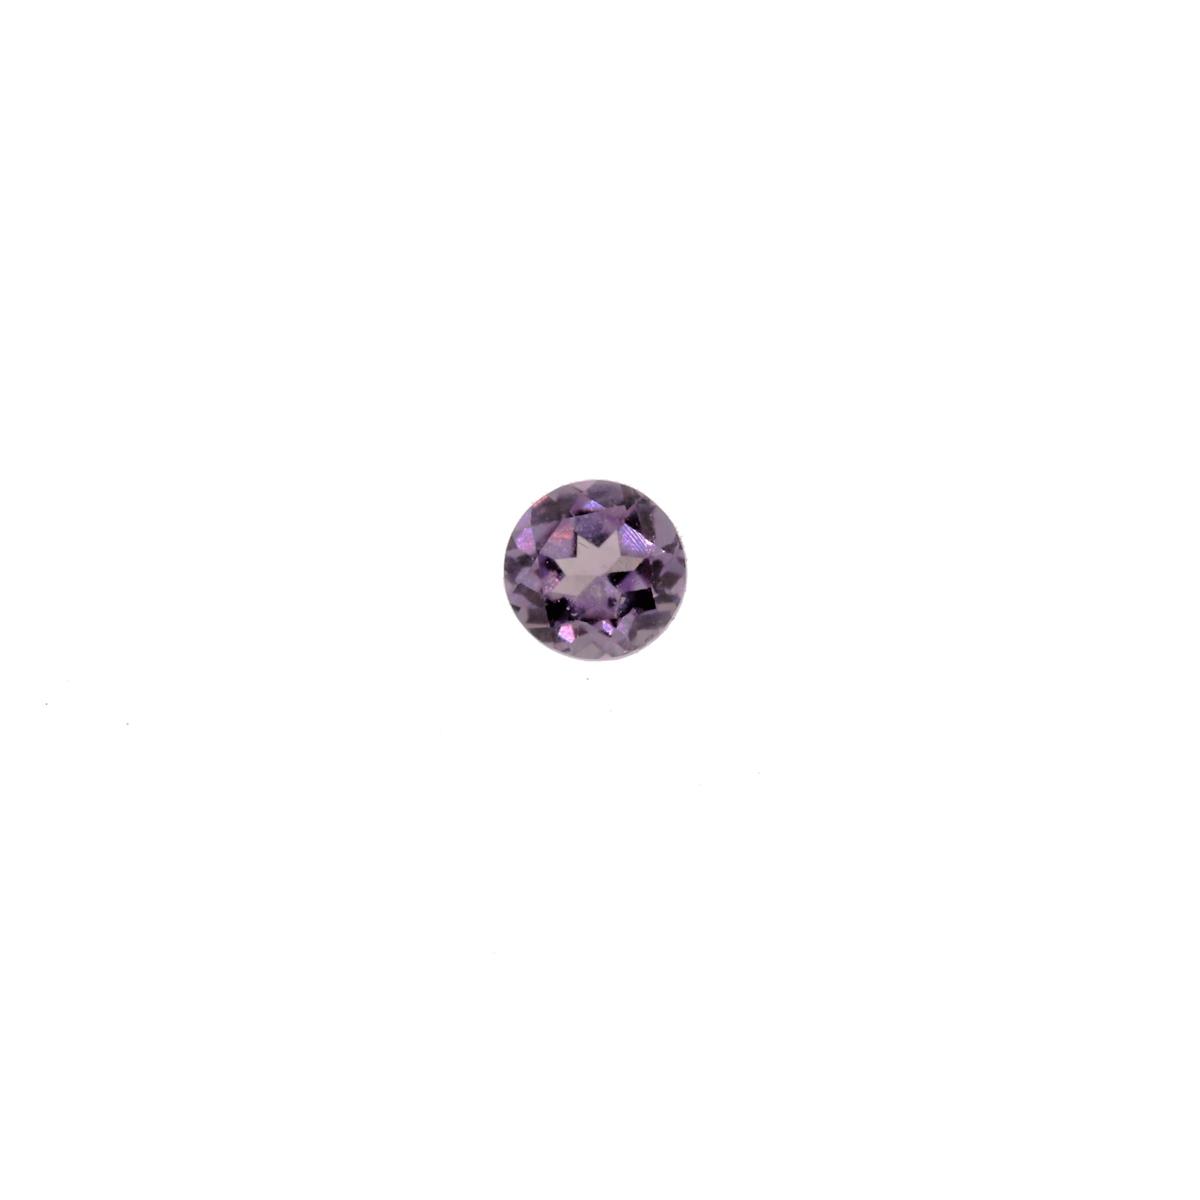 Modal Additional Images for Synthetic Alexandrite 4.75mm